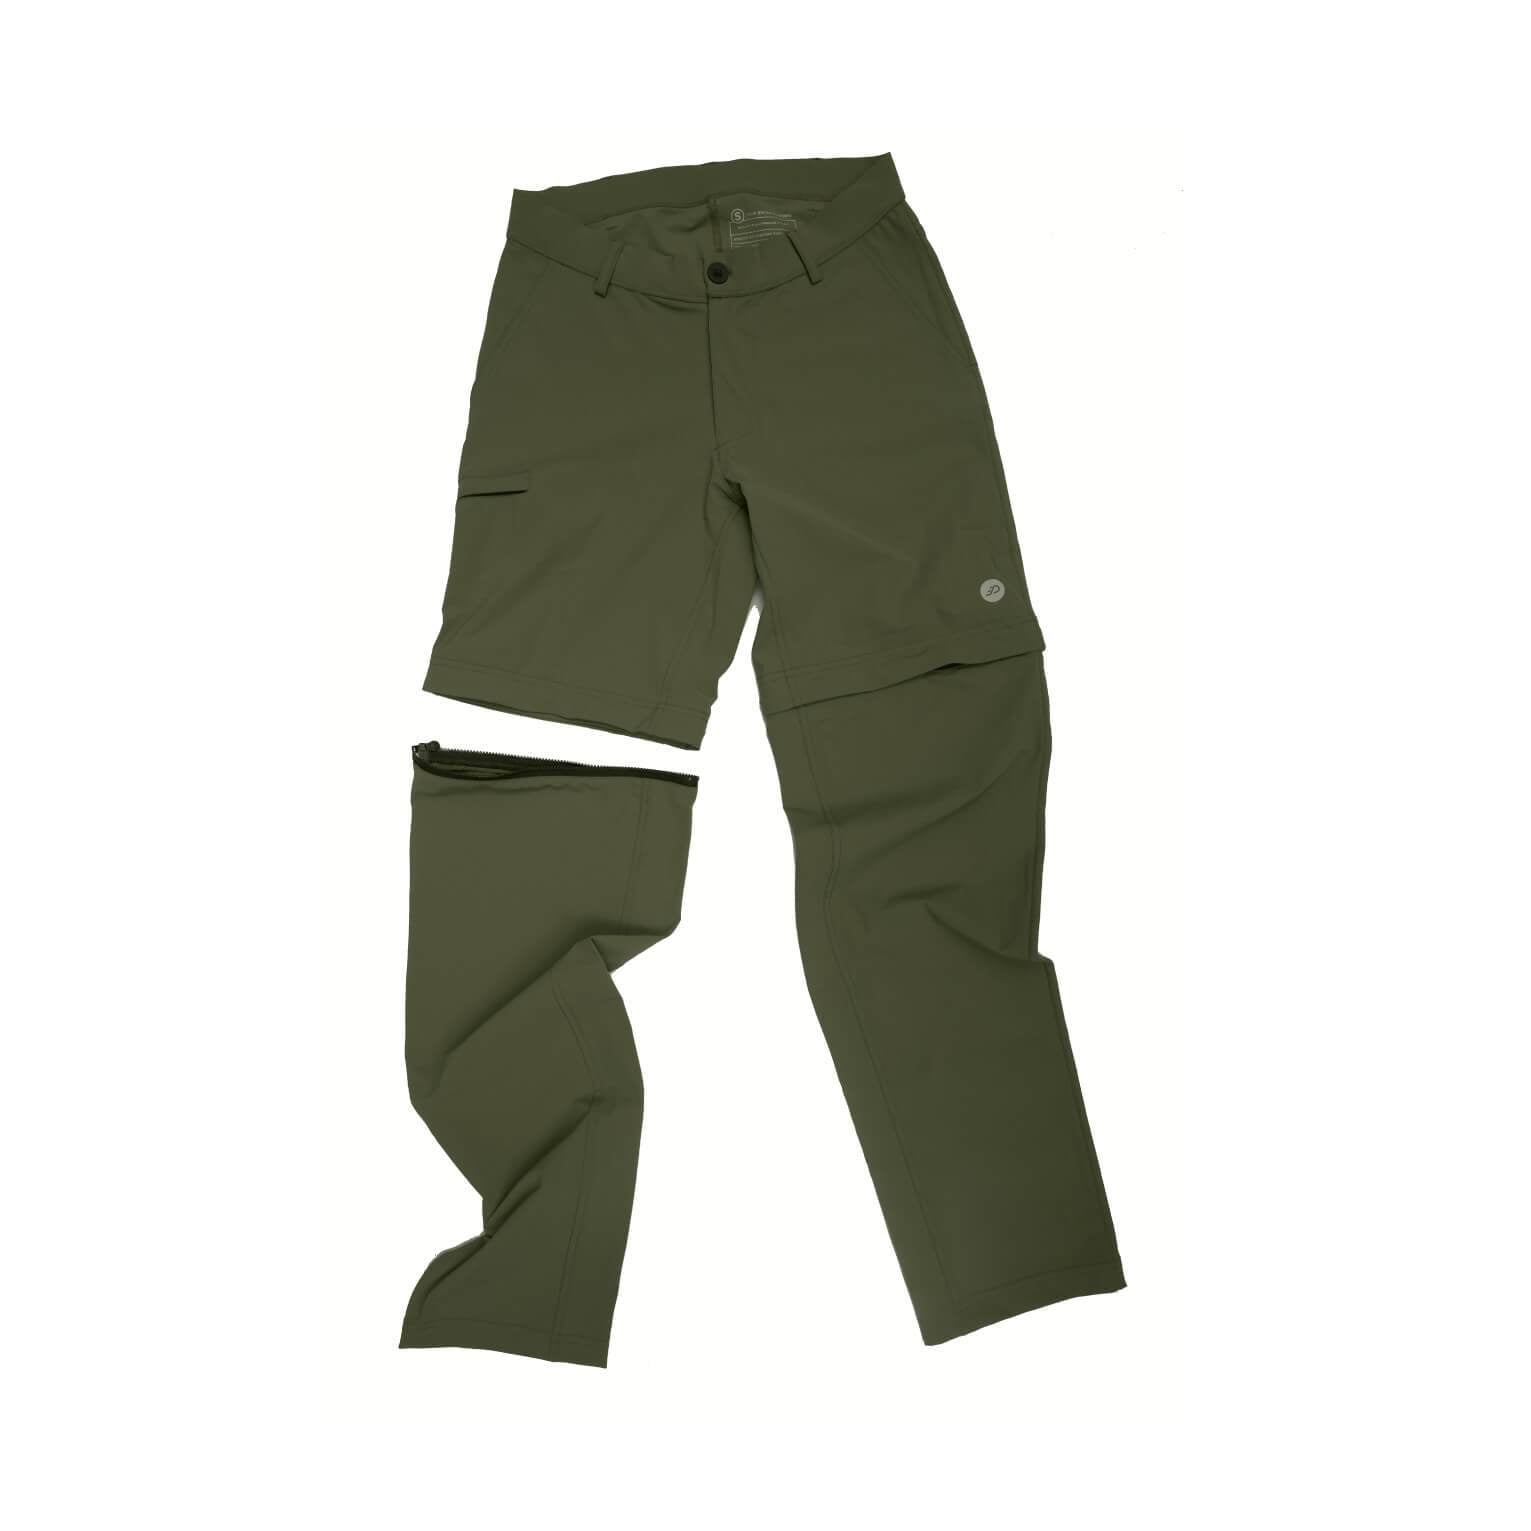 Buy 33,000ft Men's Convertible Hiking Pants, Quick Dry Stretch Zip-Off Pants,  Lightweight Cargo Pants for Camping, Fishing Sandy Brown at Amazon.in